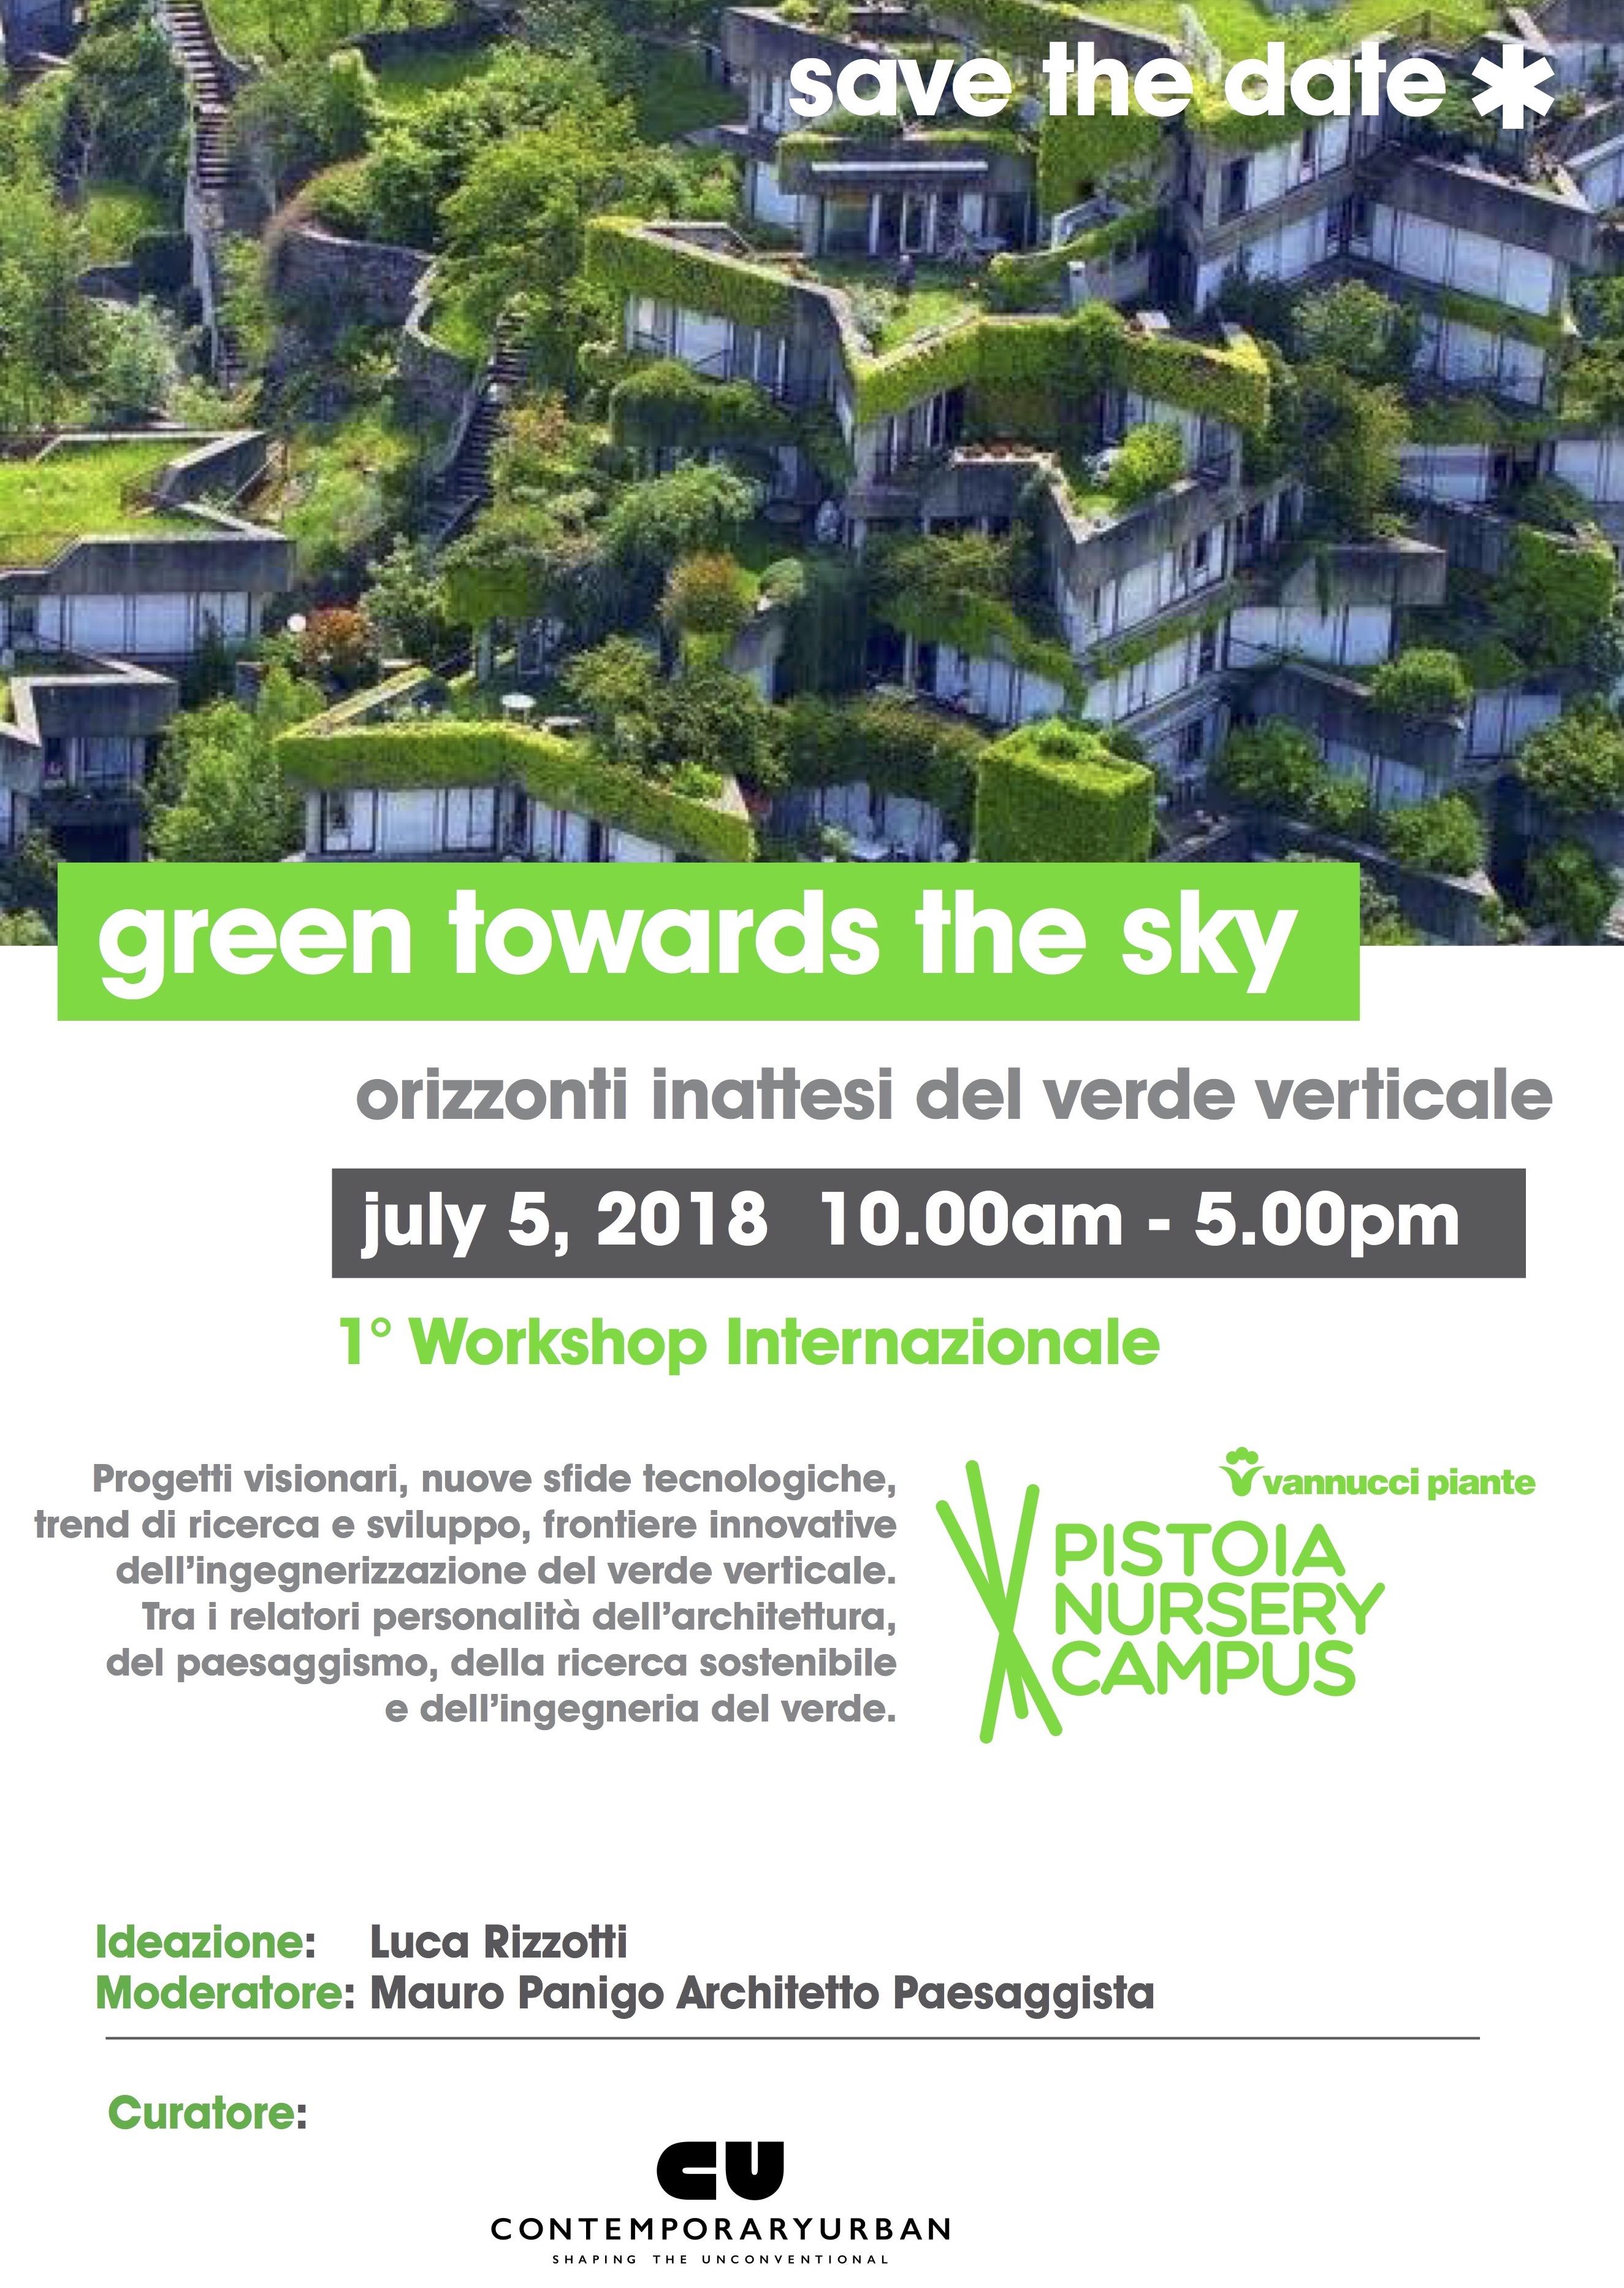 GREEN TOWARDS THE SKY > 1st INTERNATIONAL WORKSHOP ON THE VERTICAL & ROOF GREEN